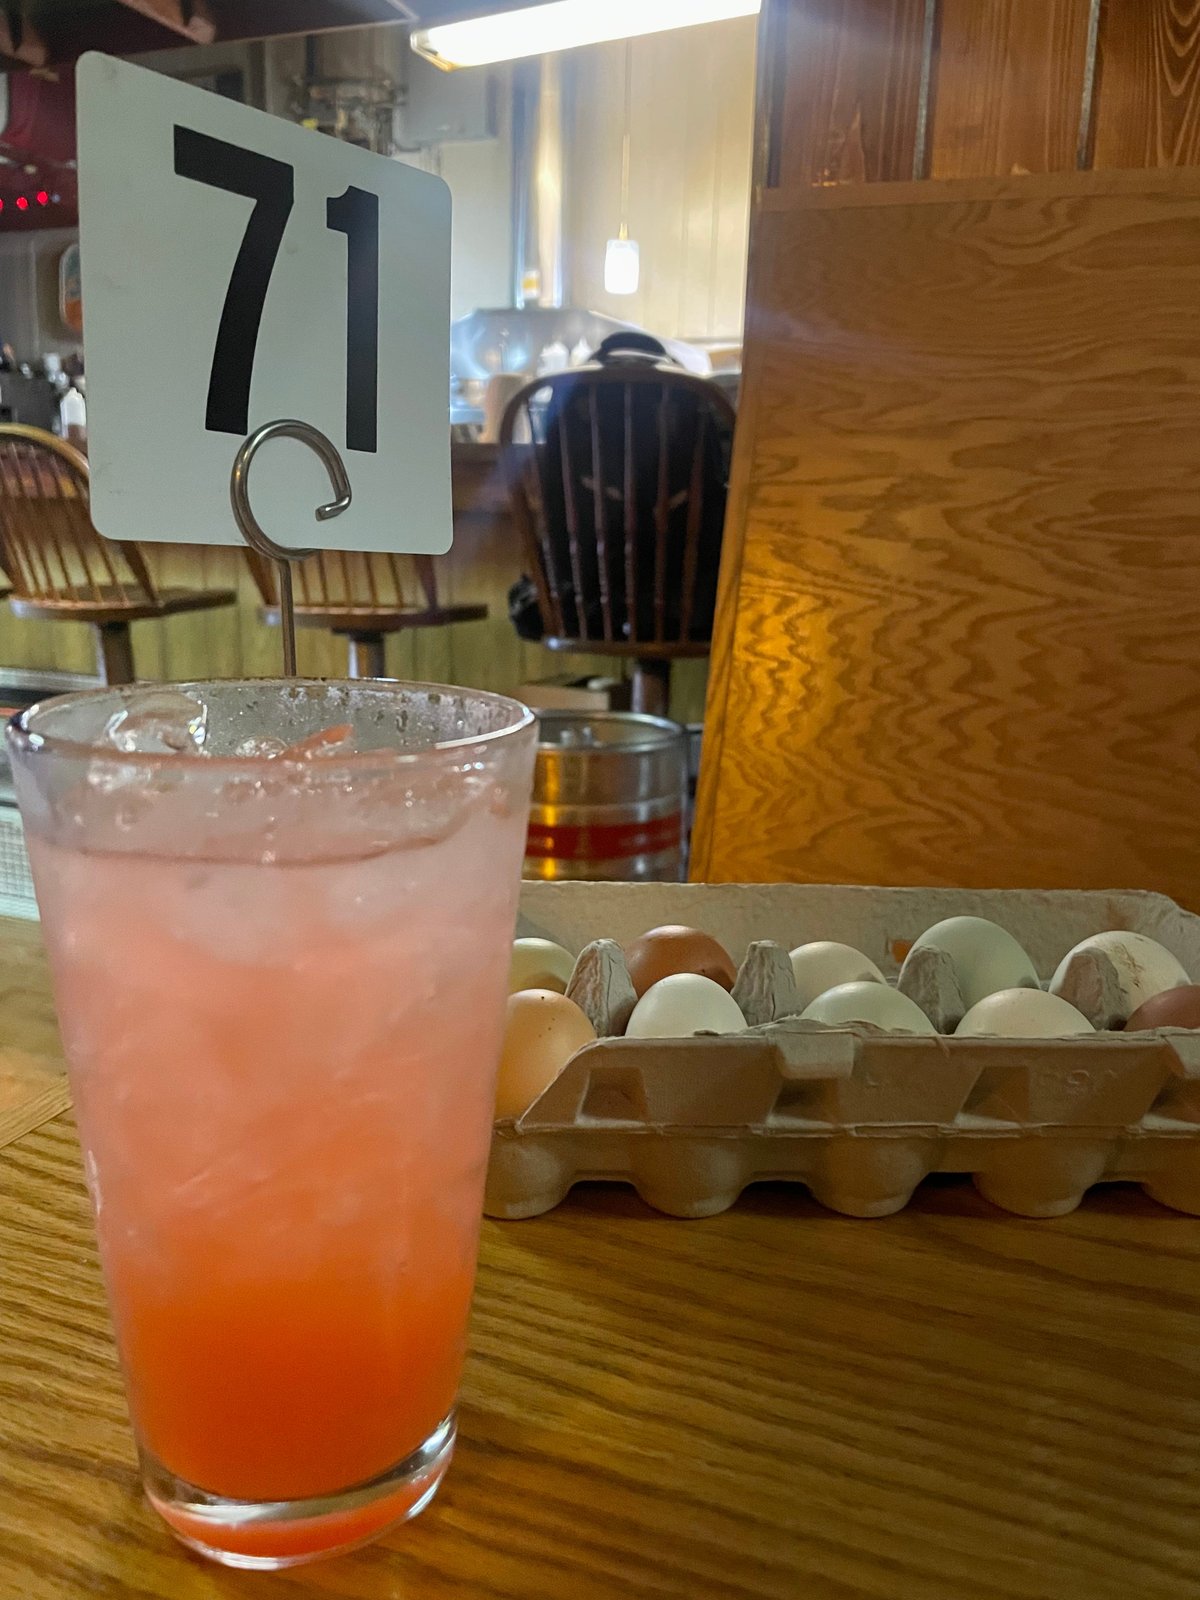 Fresh eggs and a greyhound cocktail